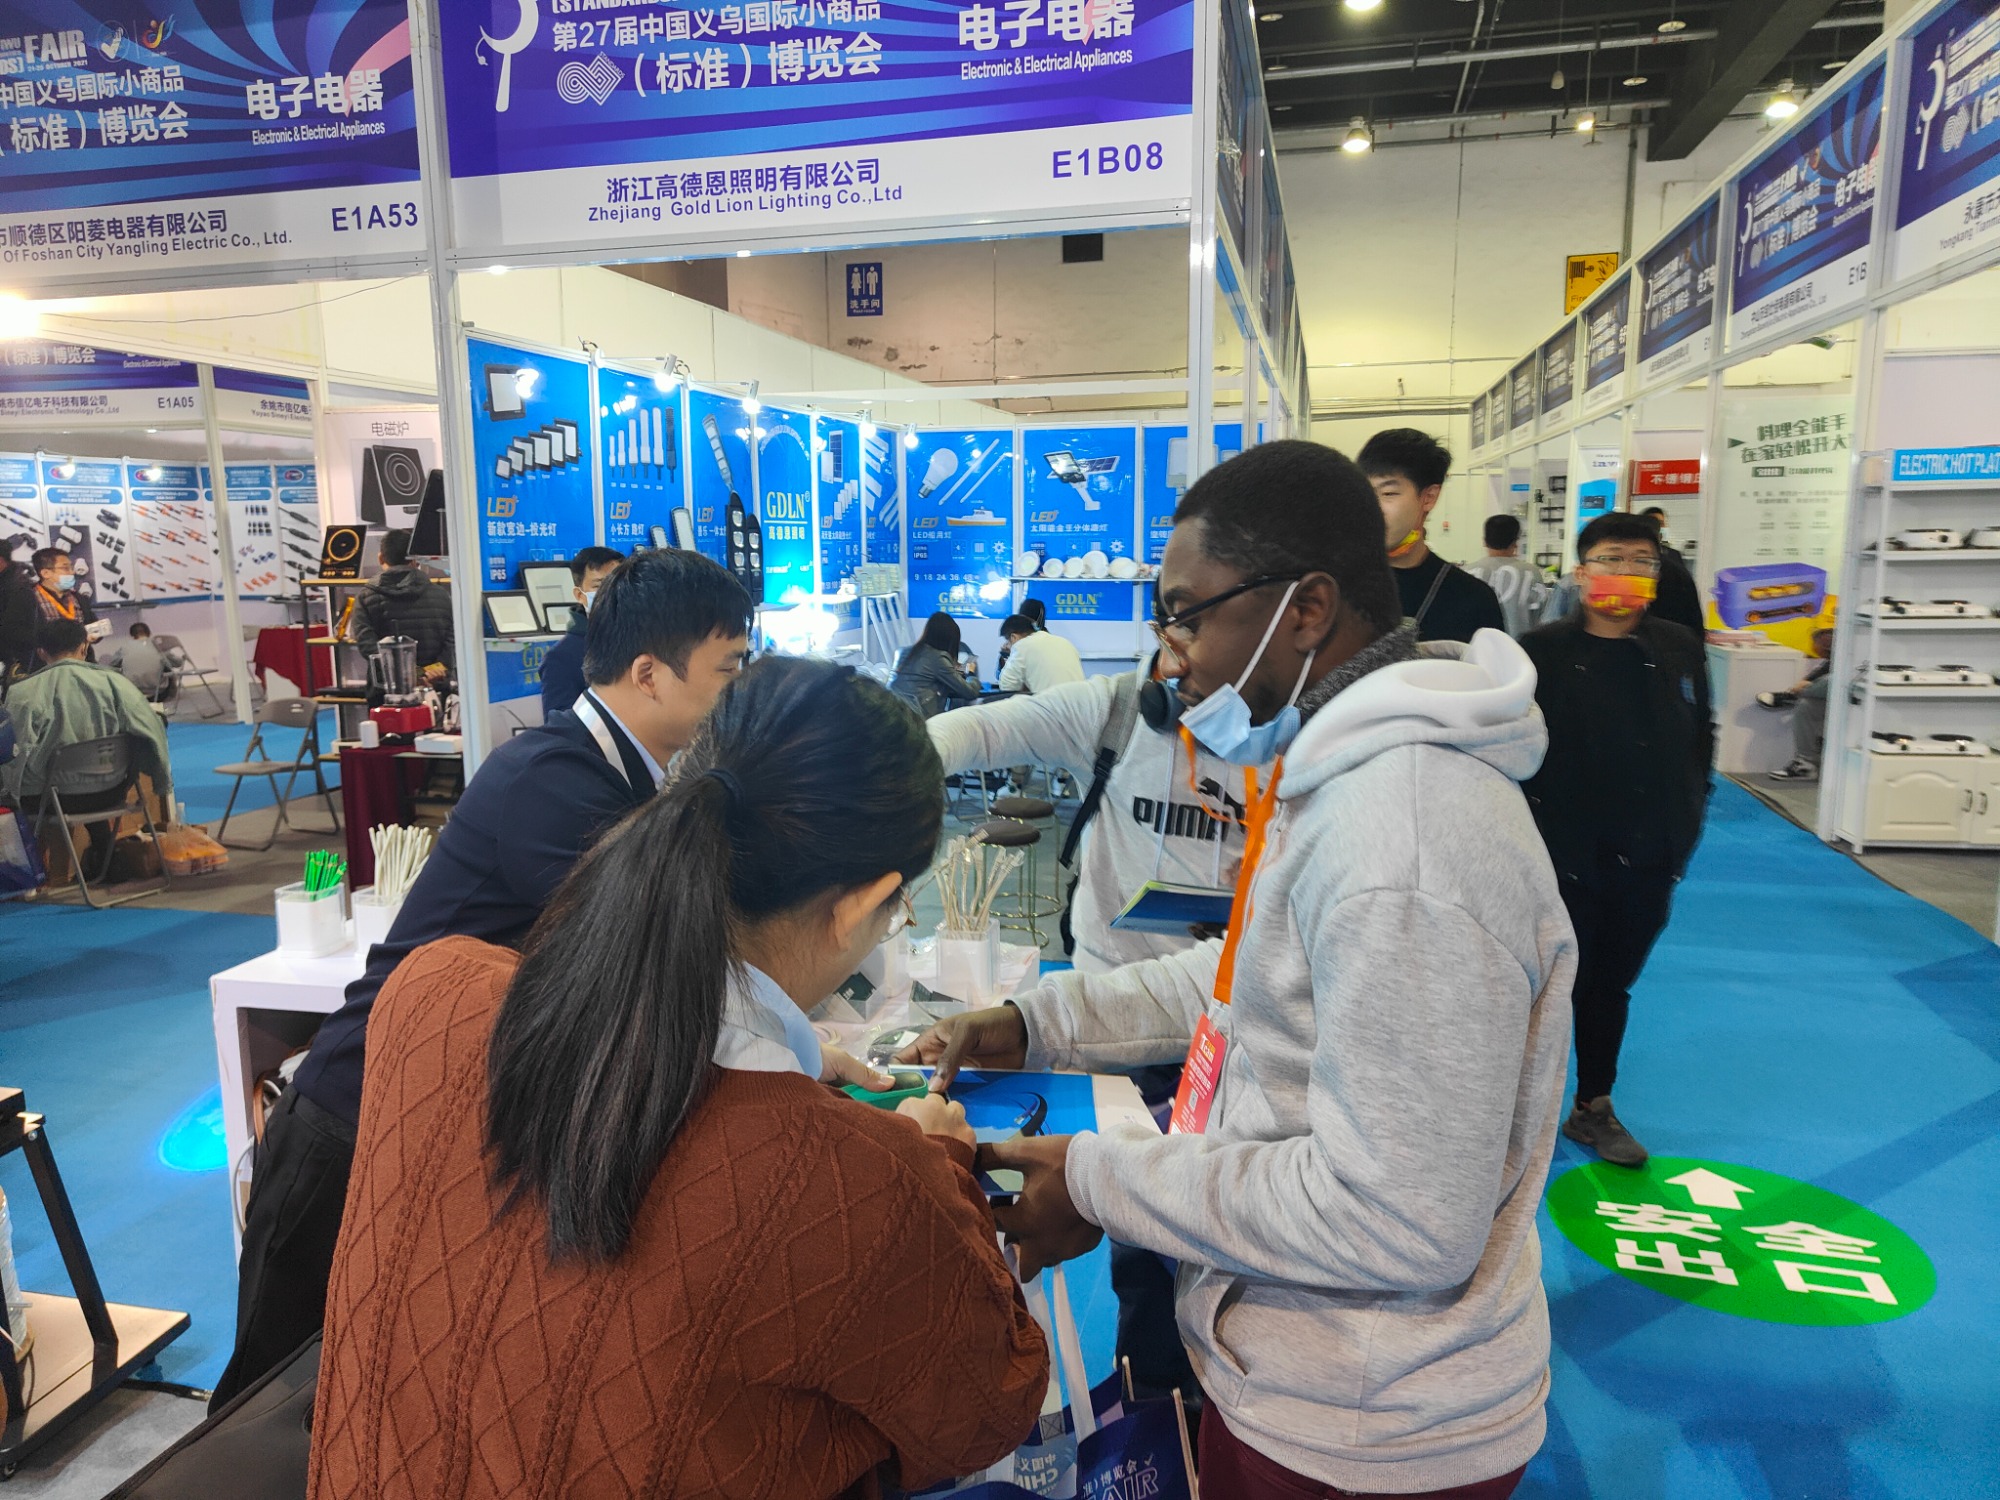 27th Yiwu Commodity International Exhibition successfully concluded